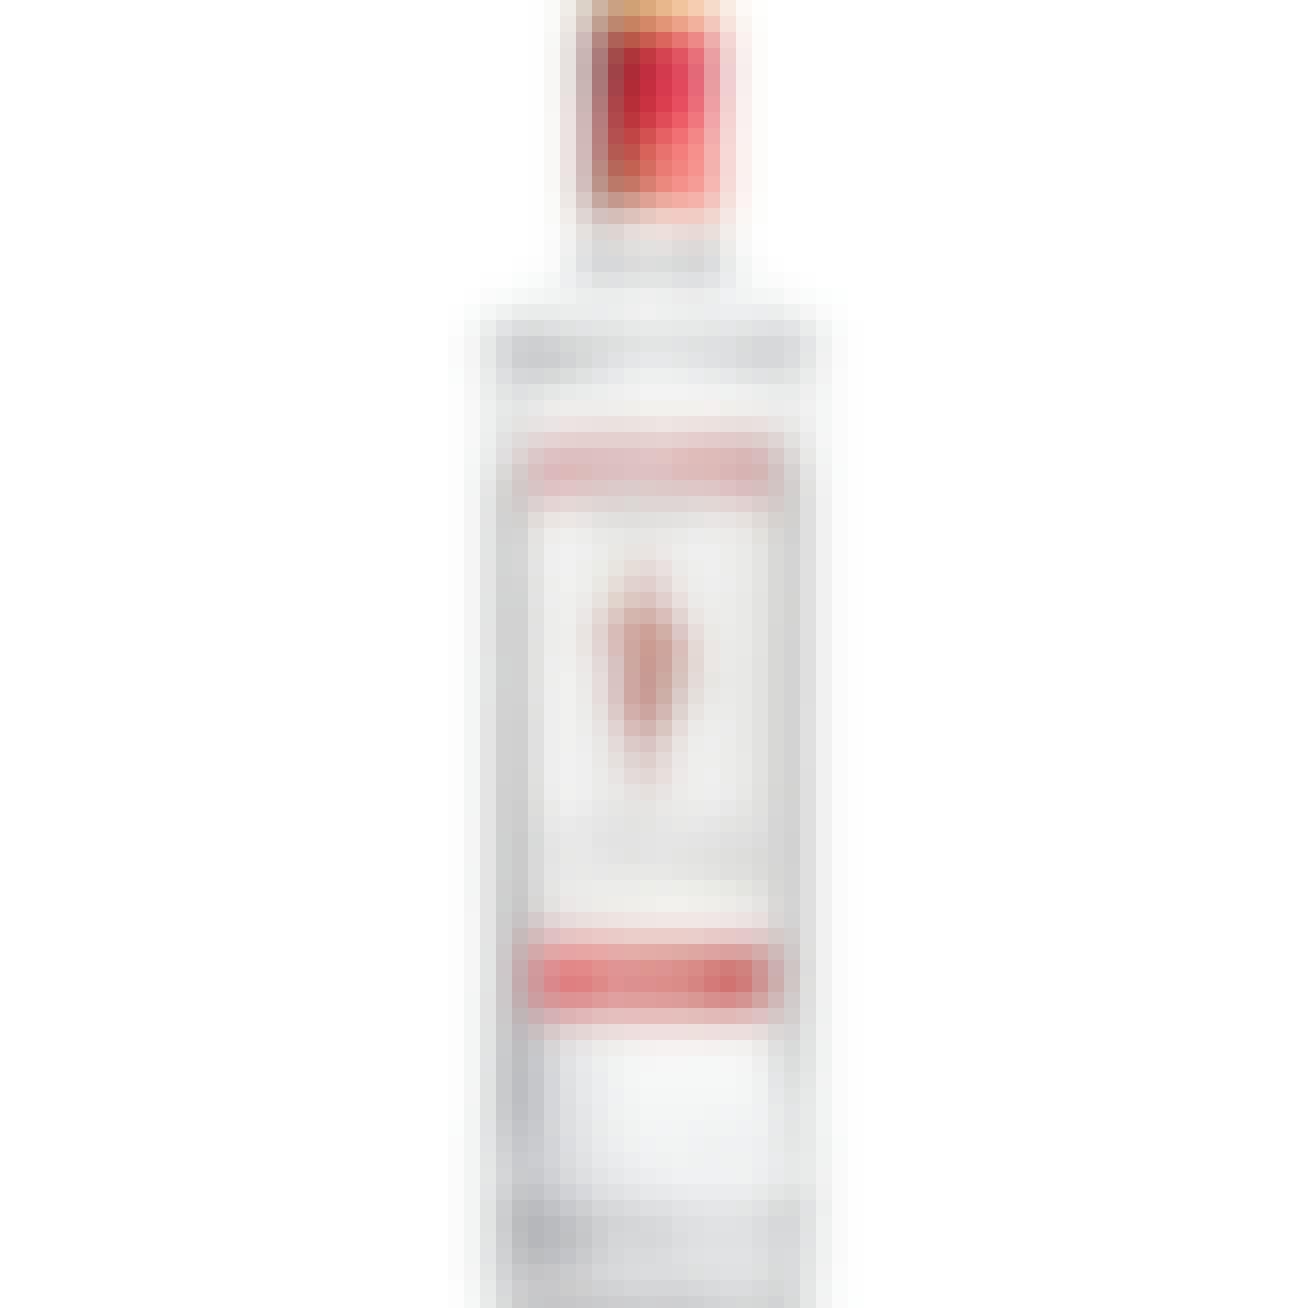 Beefeater London Dry Gin 750ml